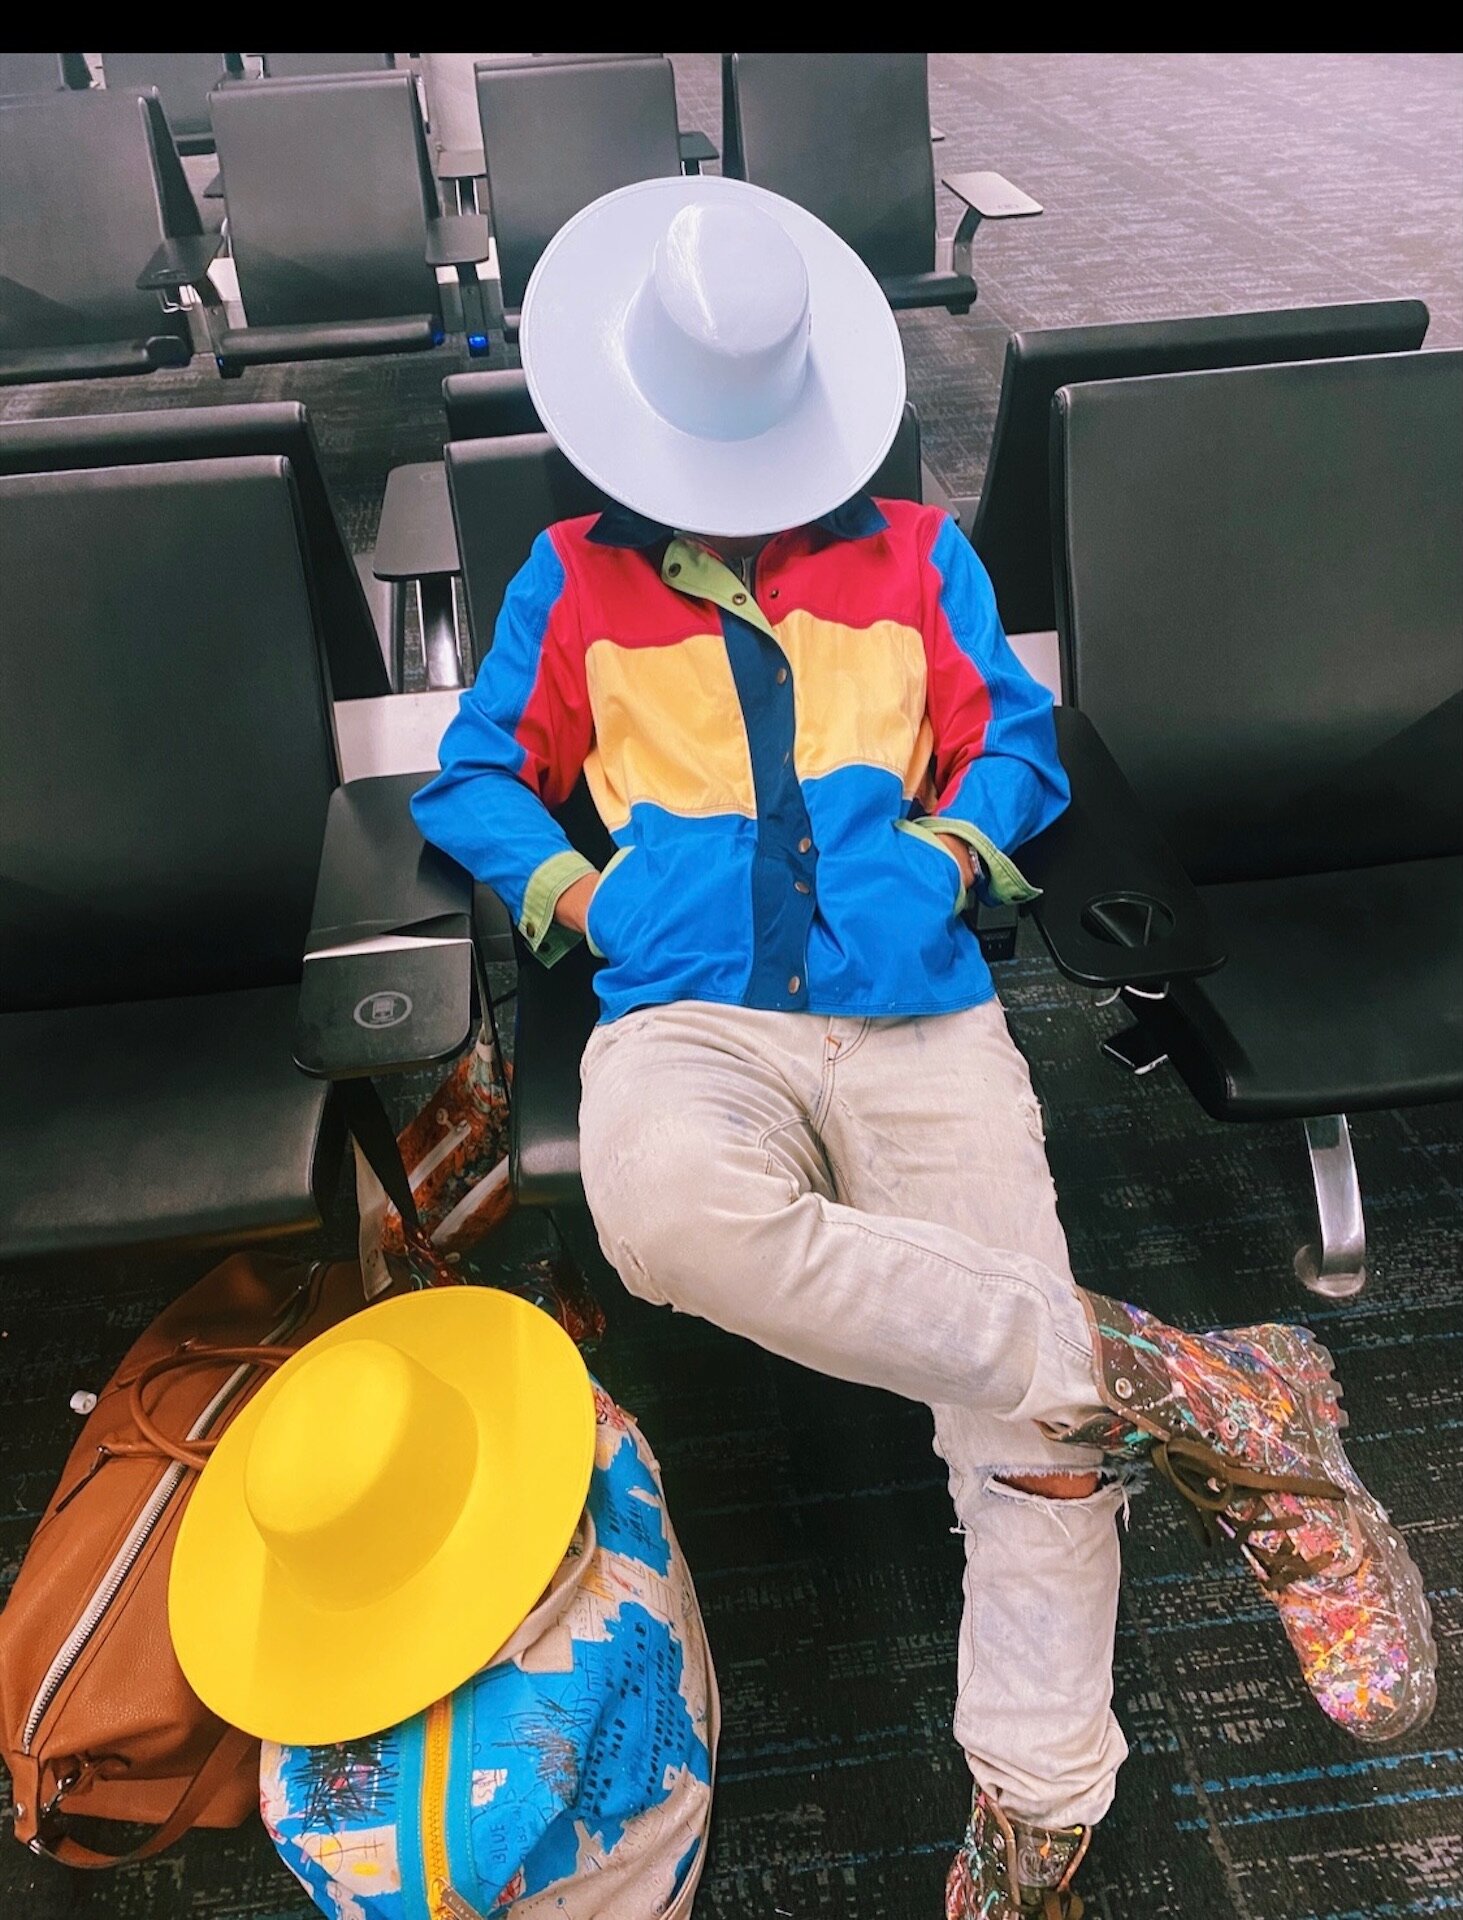 mysterious-white-airport-hat-superbloom-man-traveling-palm-springs-new-york-city.JPG